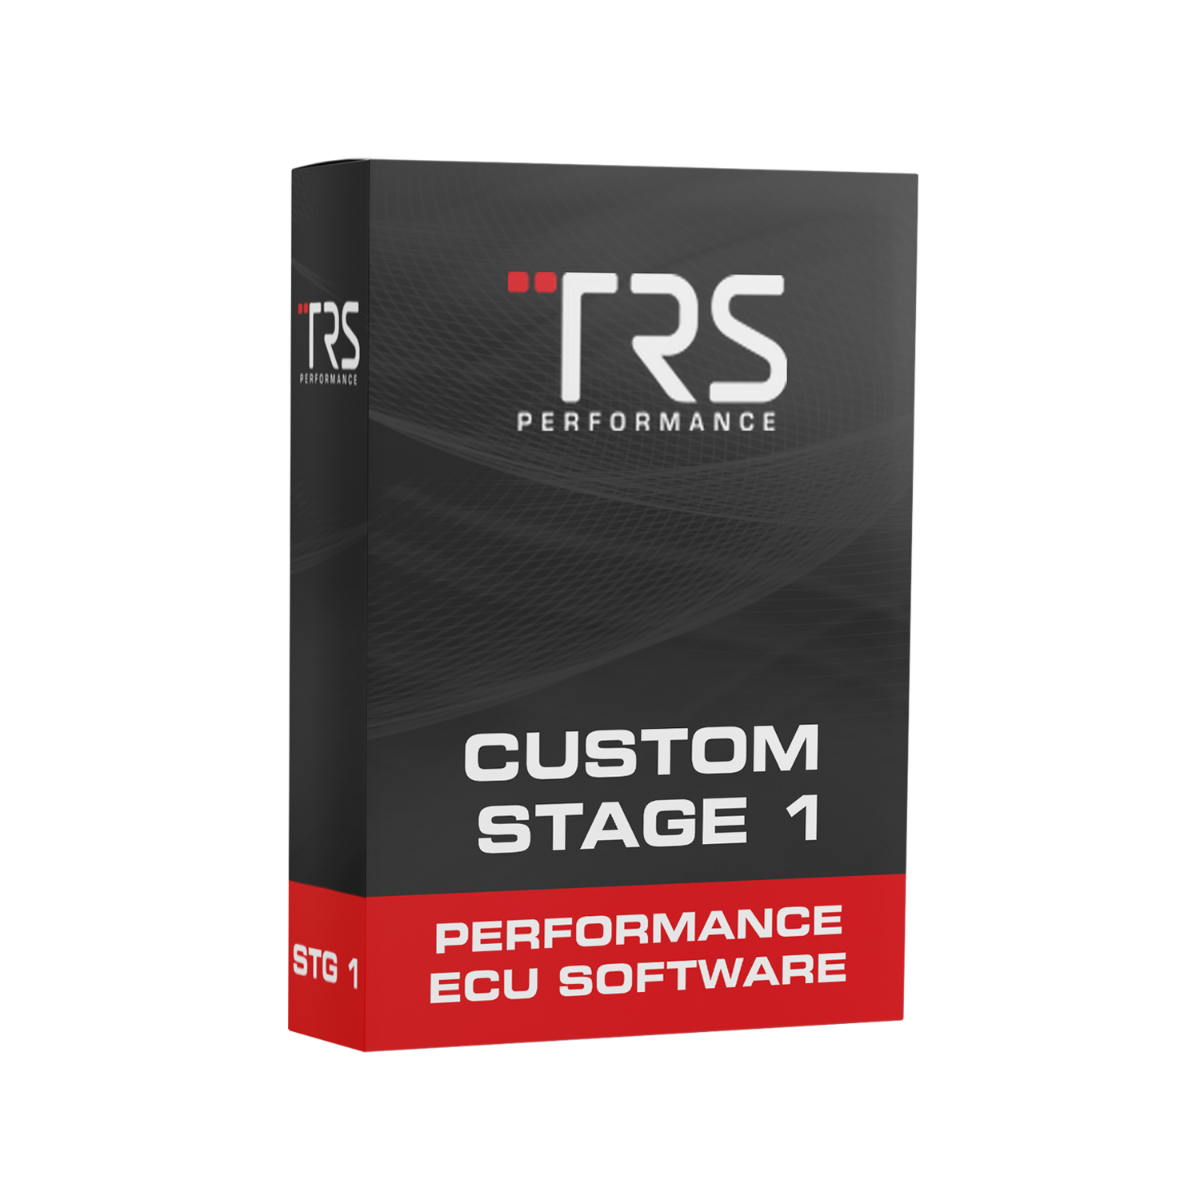 TRS Performance Custom Remap Including Gearbox TCU Stage 1 - Audi S3 8V